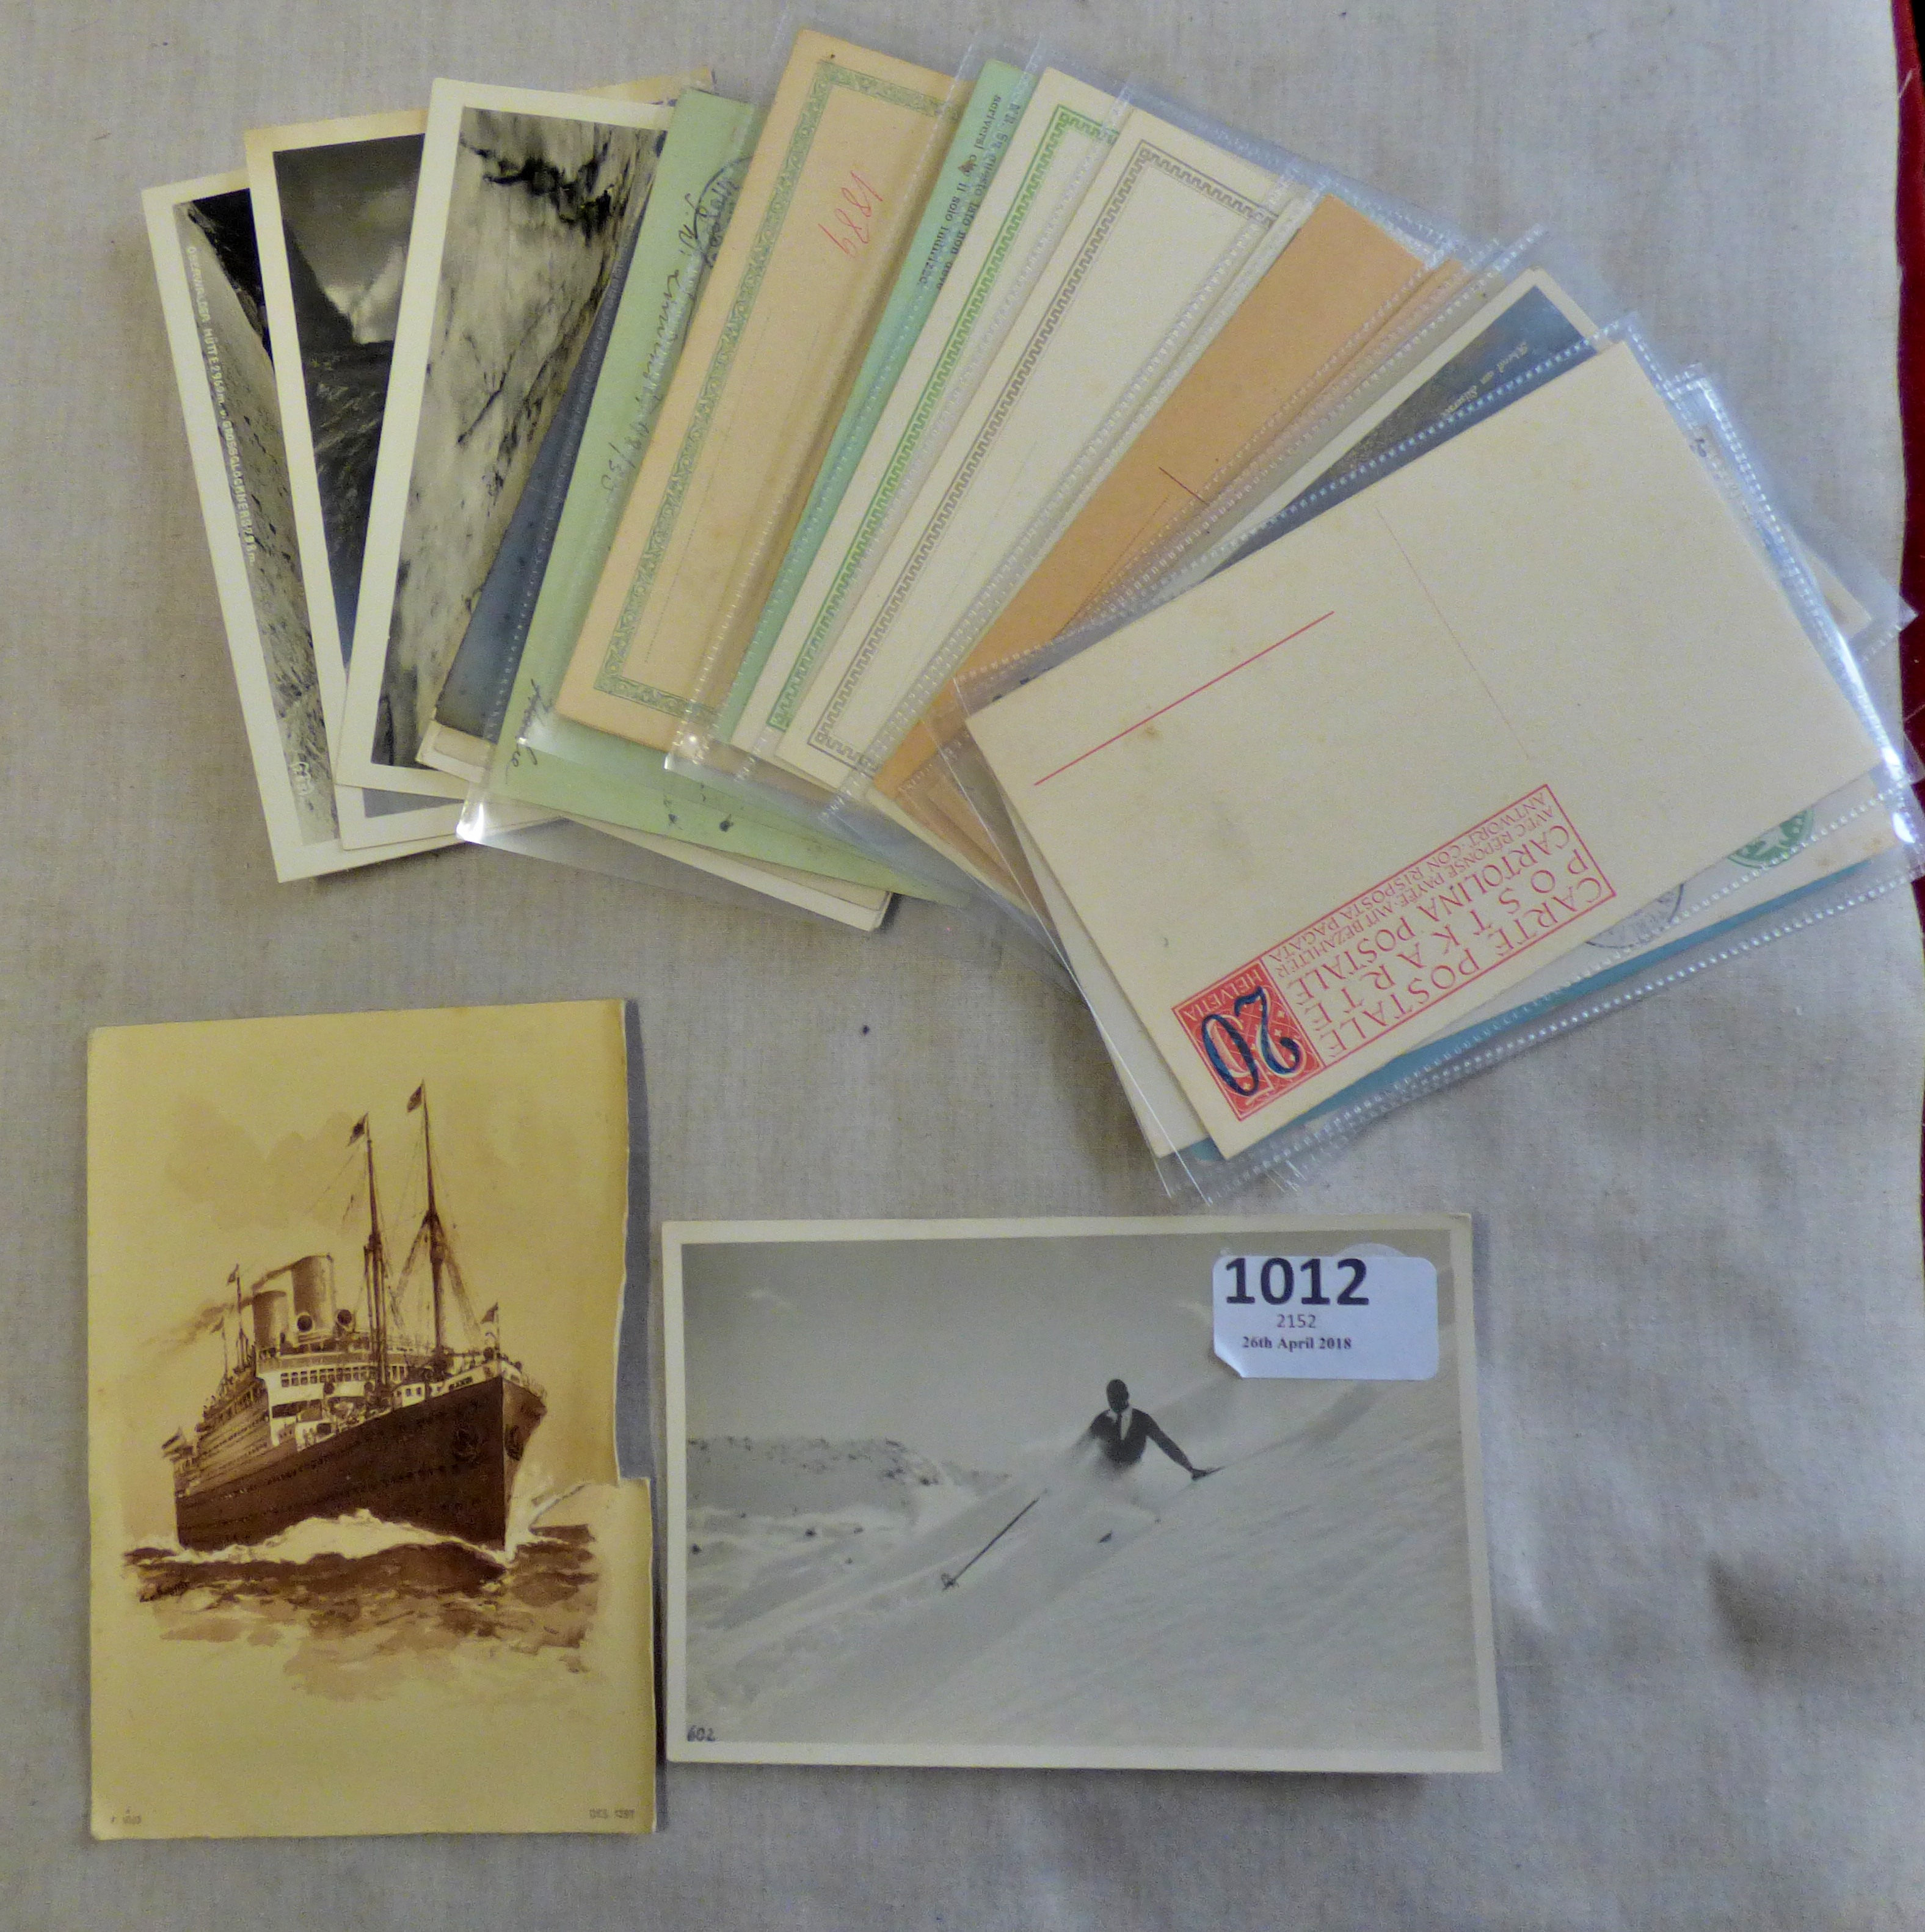 Europe - Early small collection of postal stationary and real photographic postcards including: